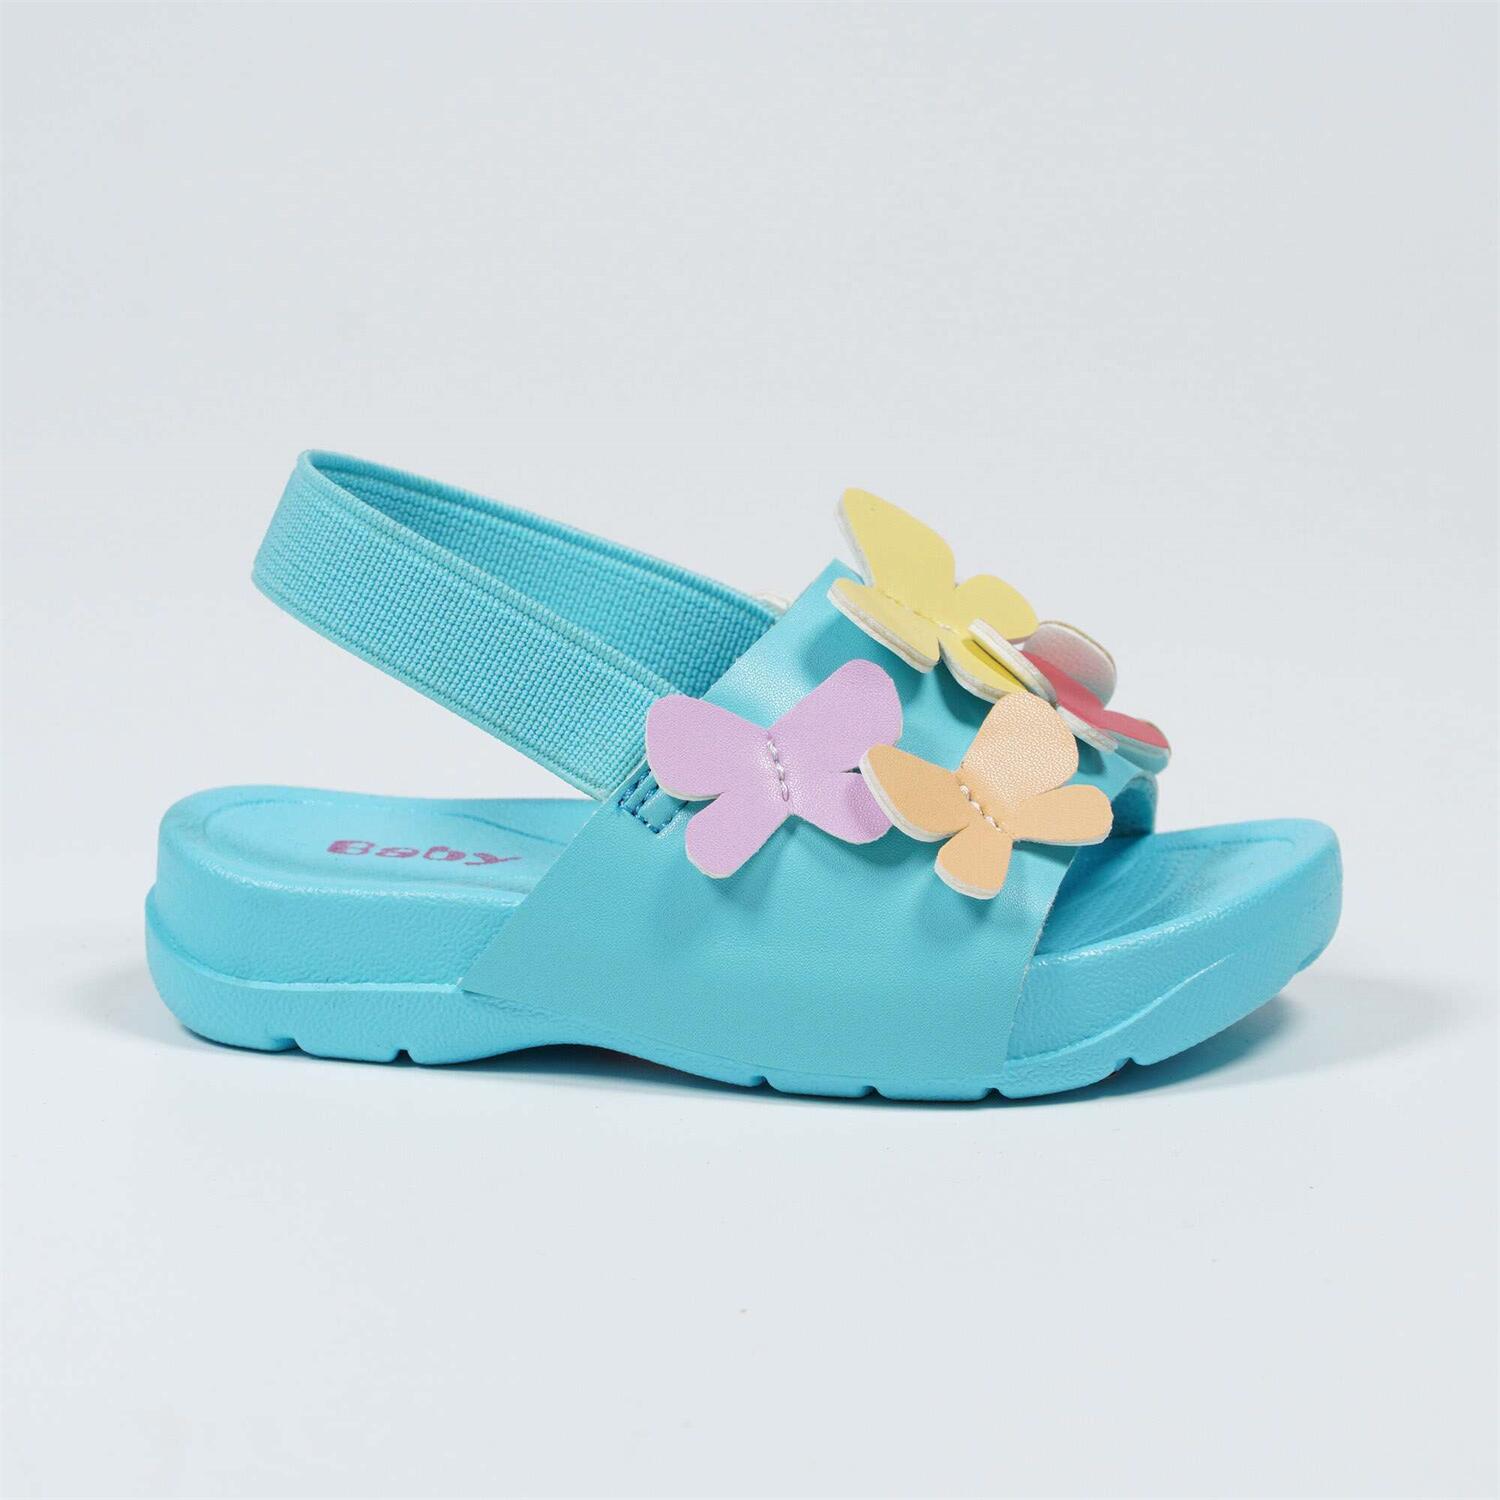 Nikoofly Colorful Butterfly Baby Slipper Sandals